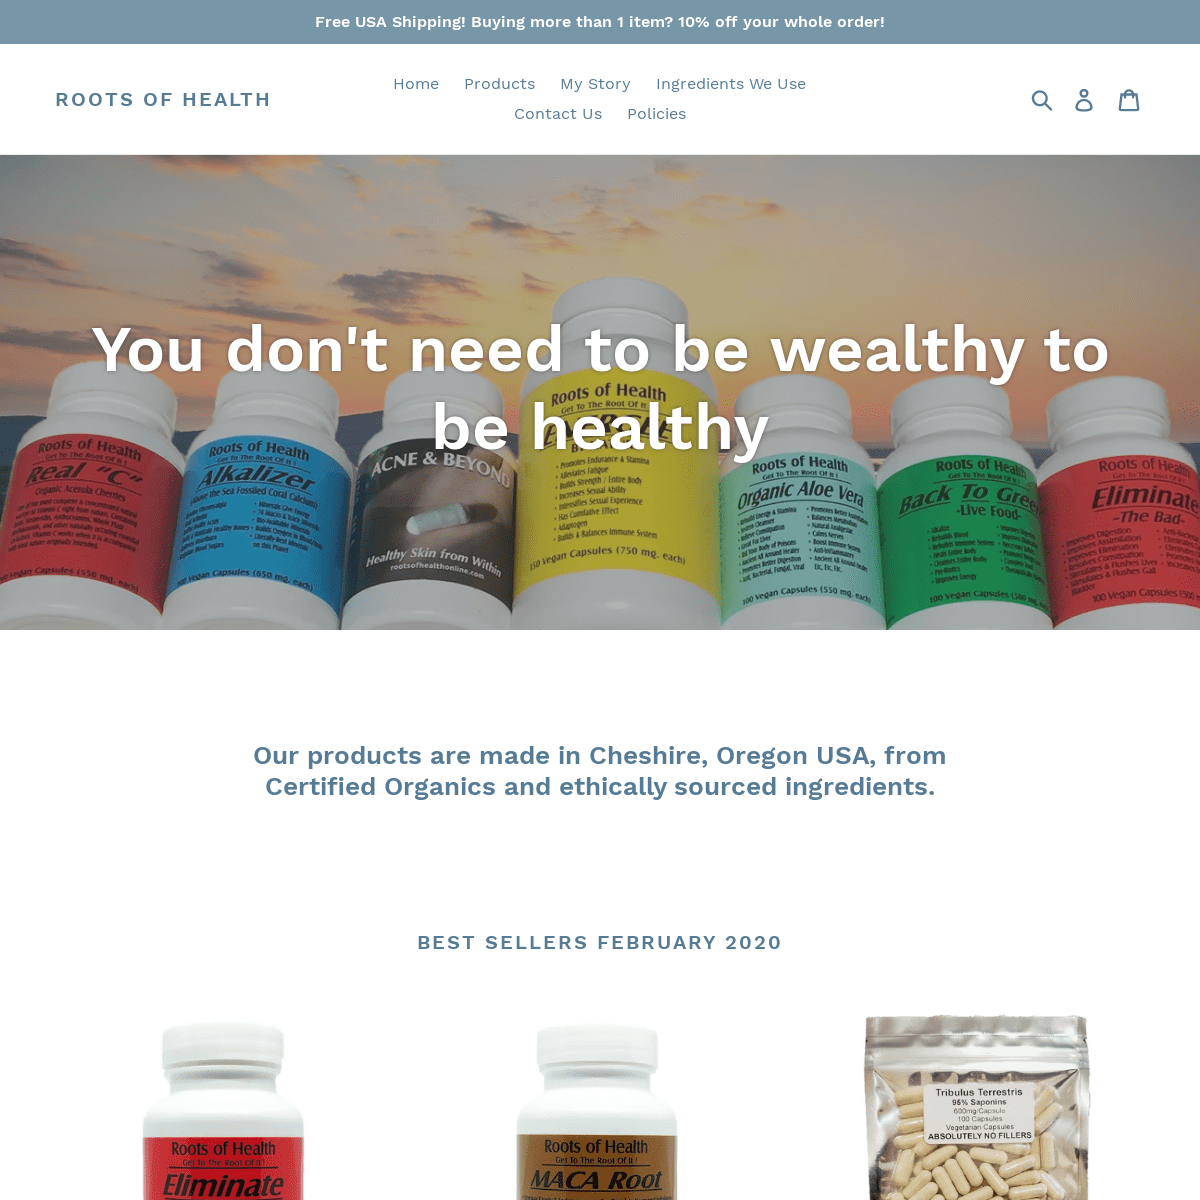 A complete backup of rootsofhealth.myshopify.com